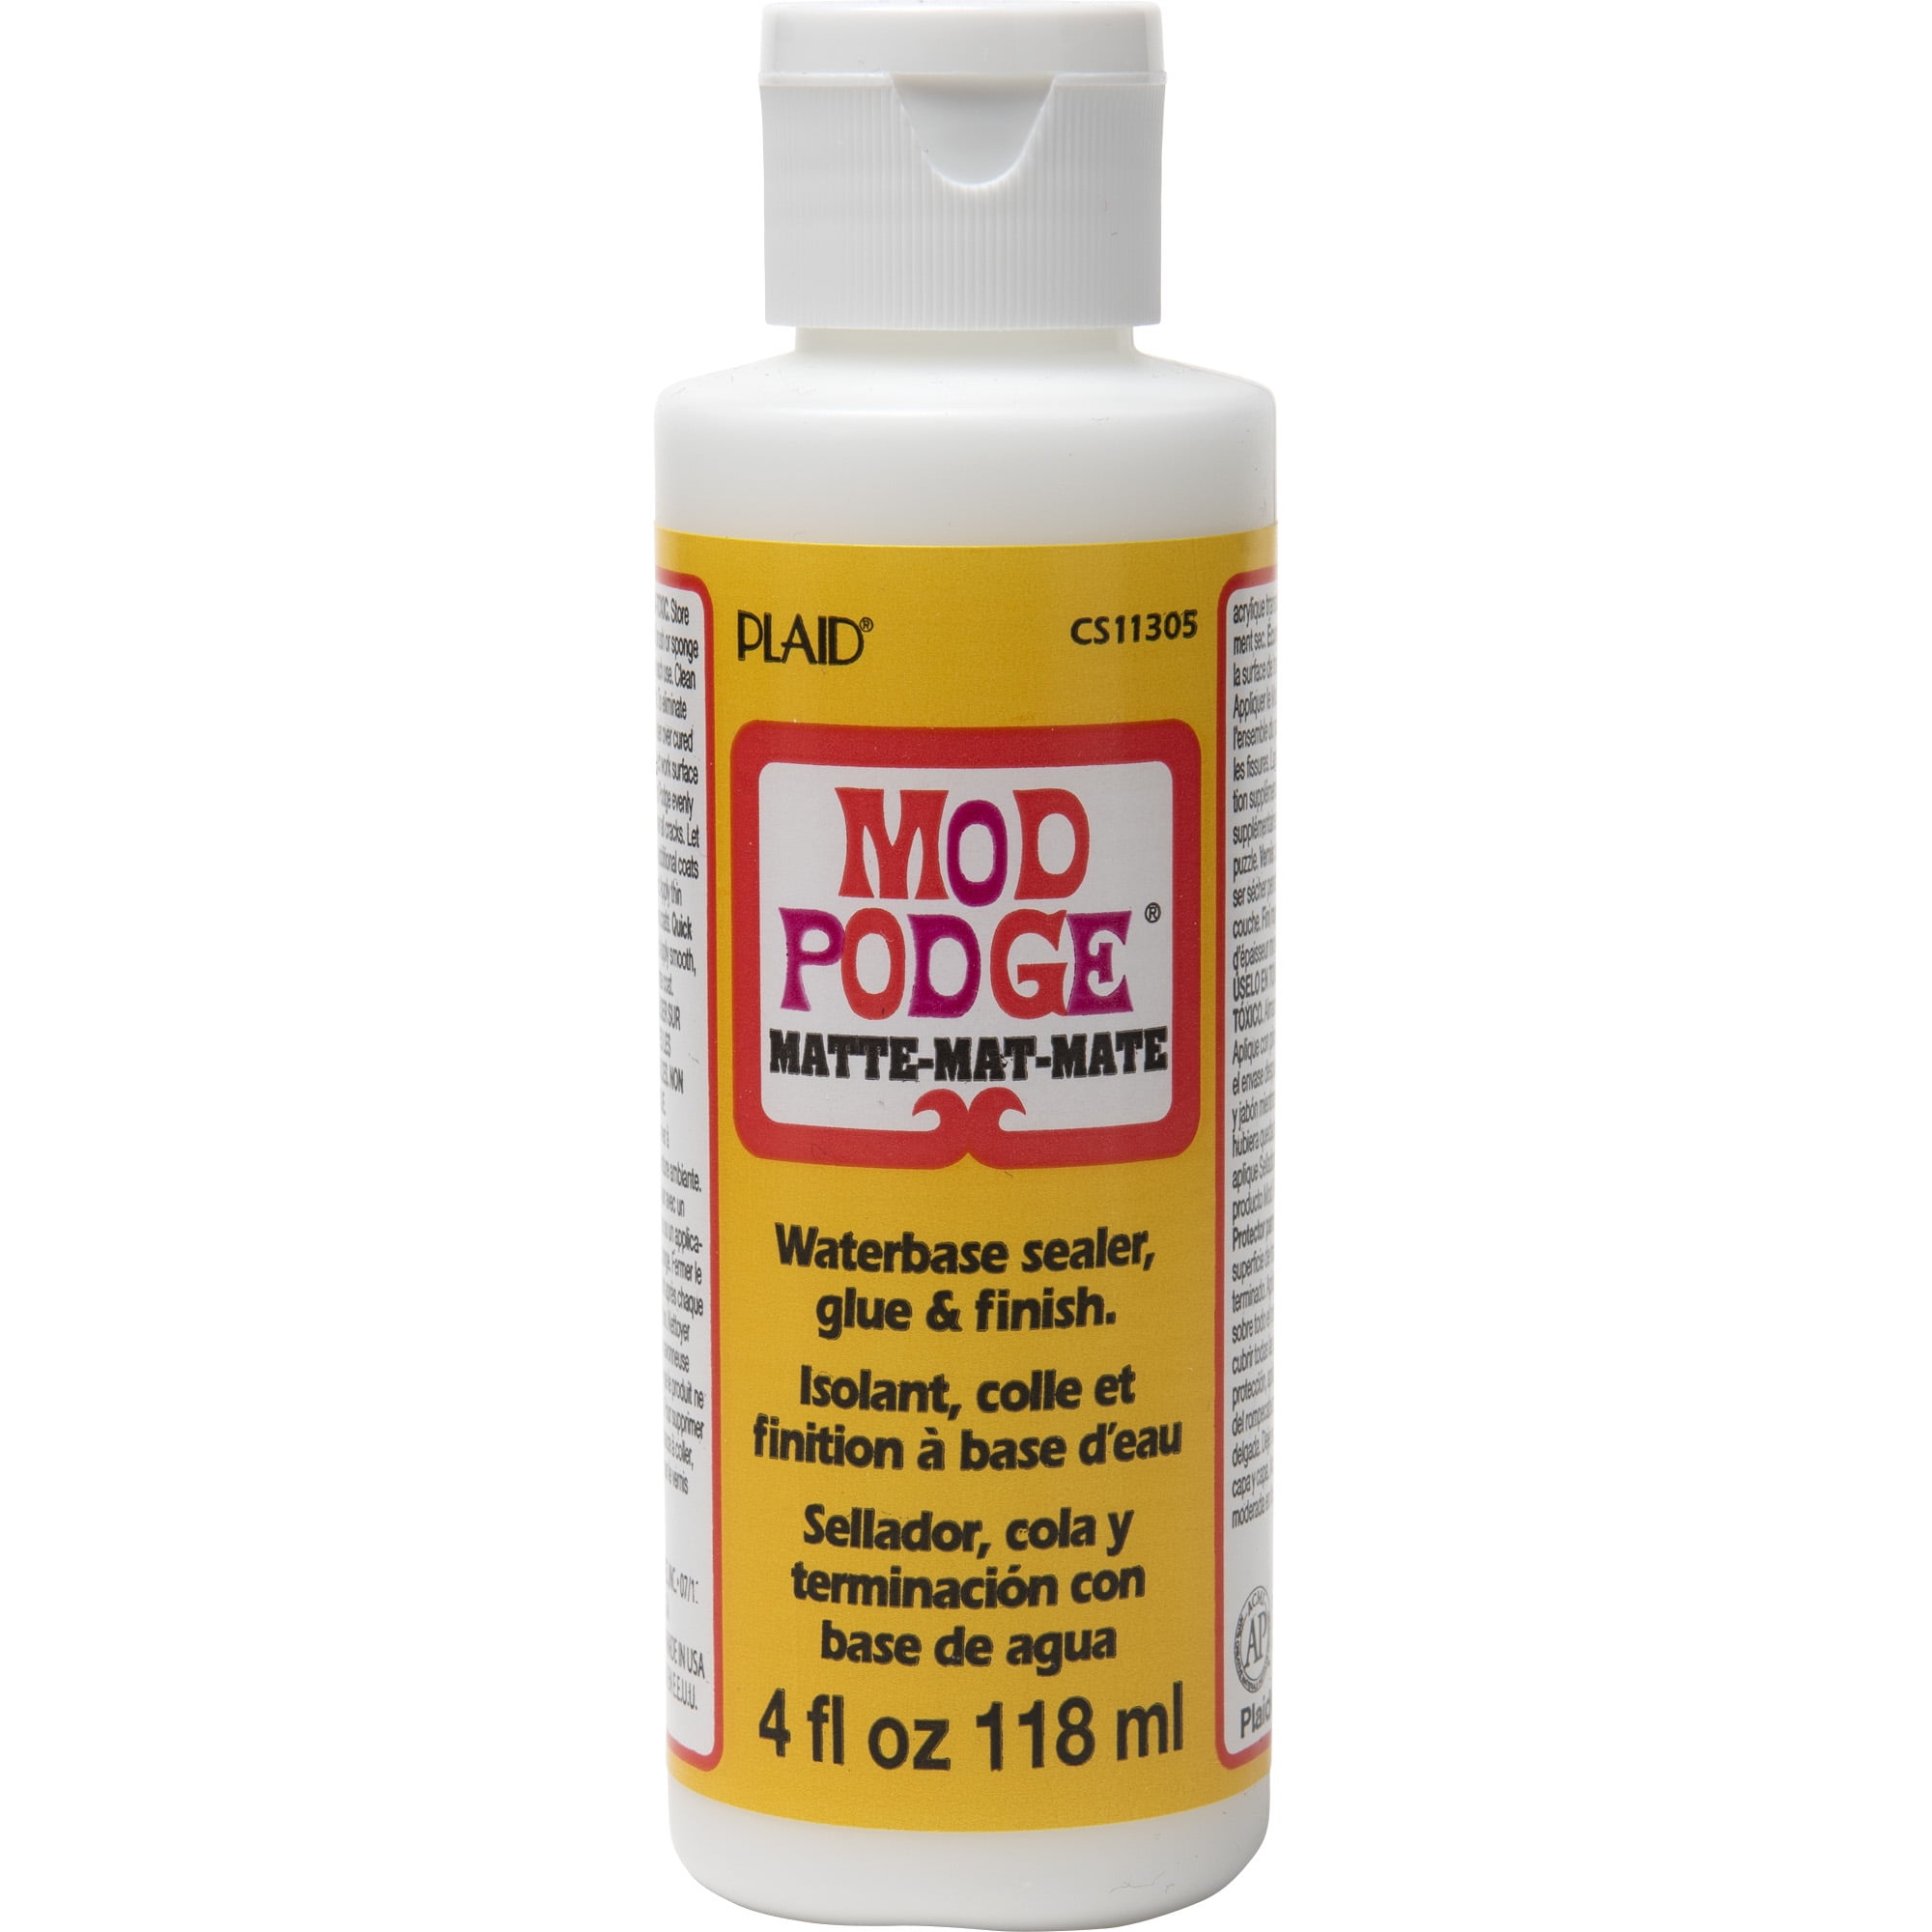  Mod Podge Water Resistant Glue, 4 fl oz Premium Acrylic Sealer,  Perfect for Easy to Apply DIY Arts and Crafts, CS25386, Clear